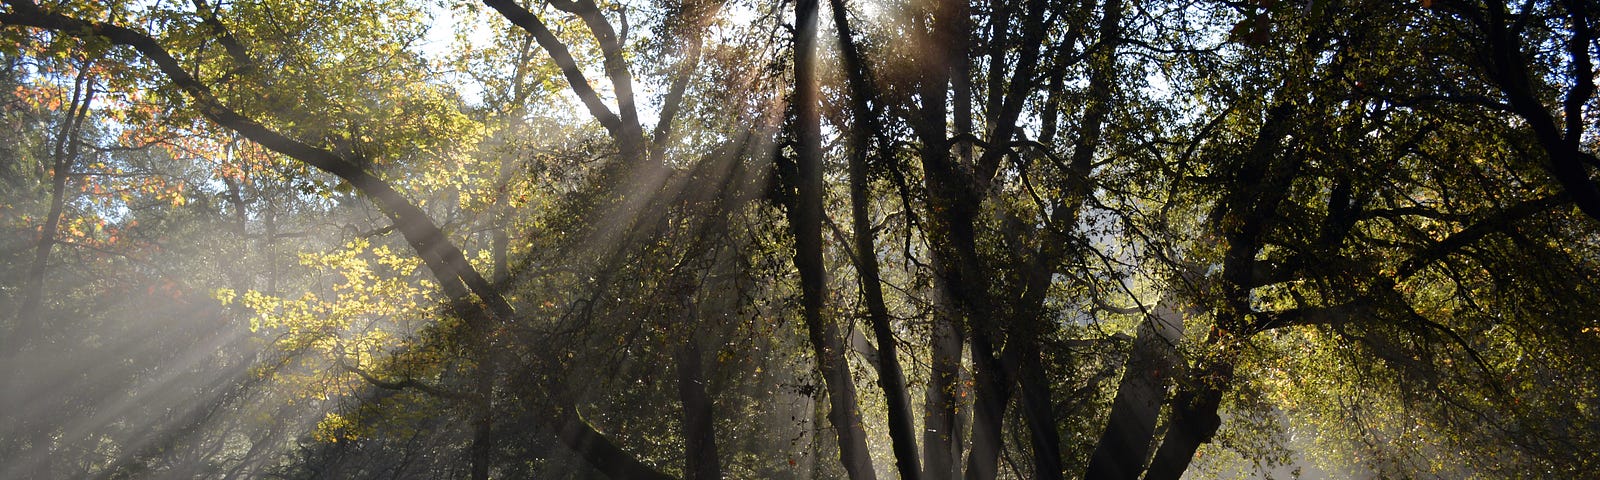 sunlight shining through the branches of tall trees with green leaves